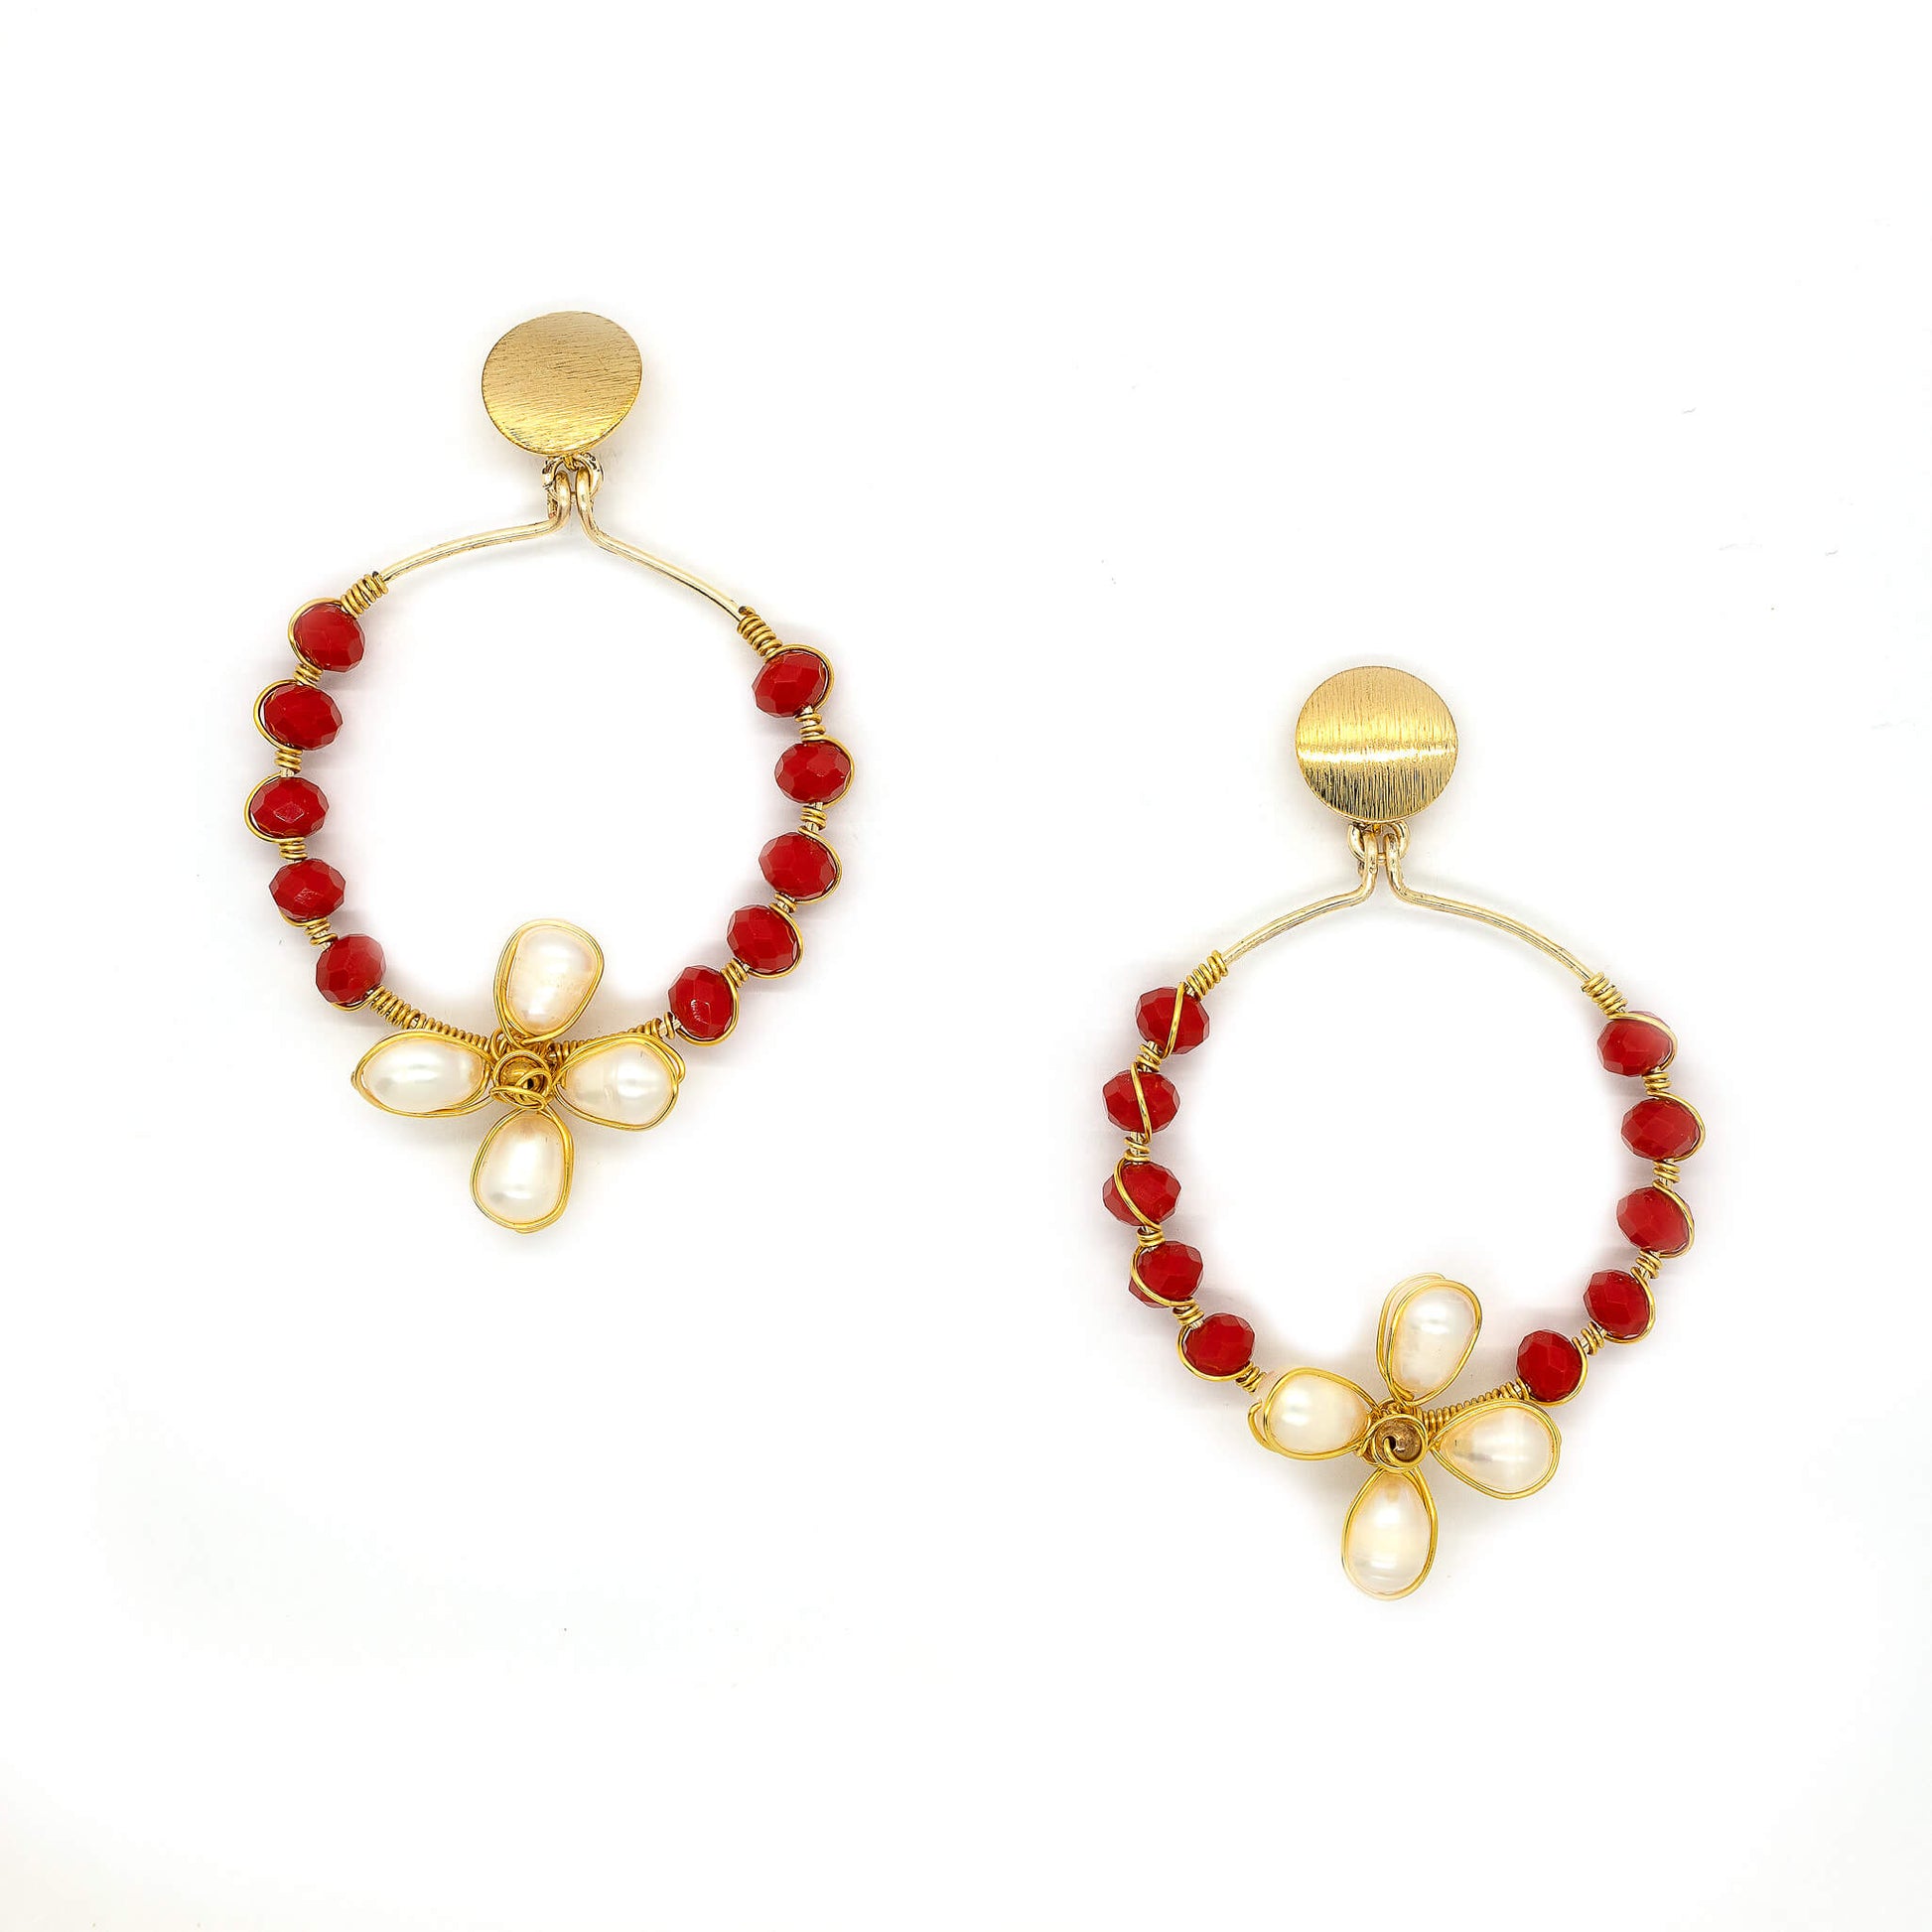 The Camille earrings are almost 3 inches long, Gold, white, and red earrings. Wire Wrapped Earrings. Simple and minimal earrings. Handmade for women. Large dangle earrings.